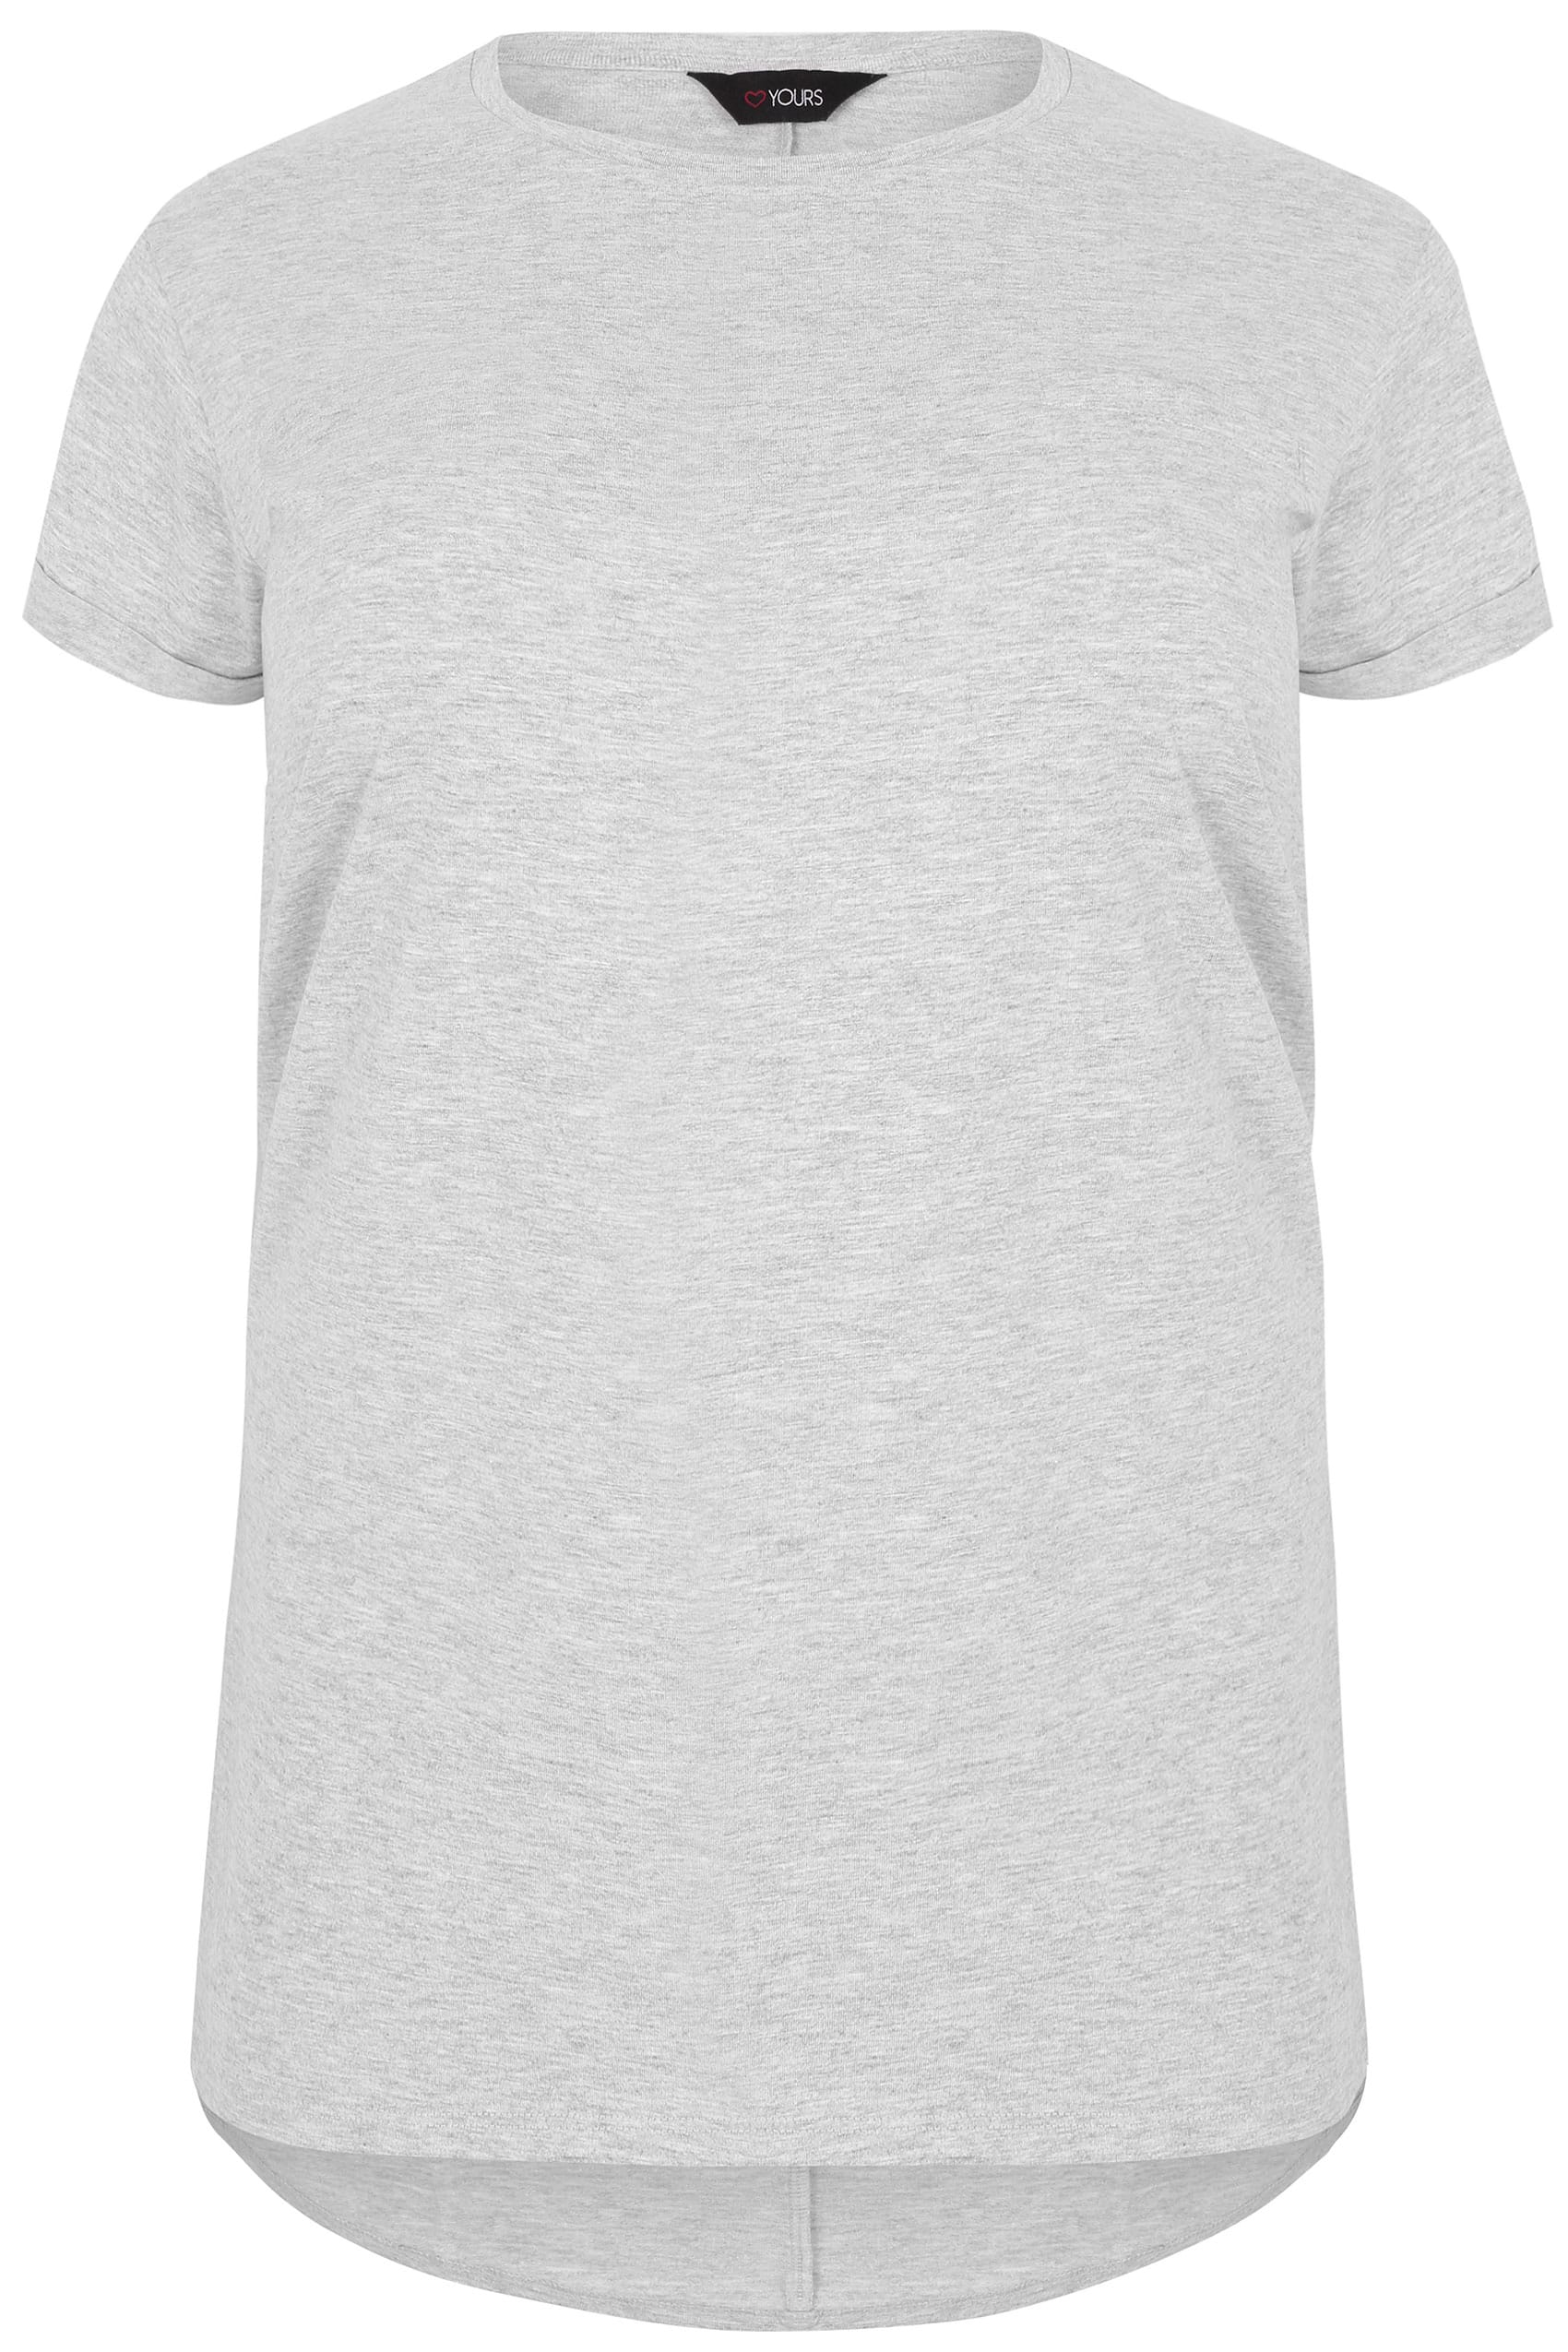 Grey Marl Mock Pocket T-Shirt With Curved Hem, Plus size 16 to 36